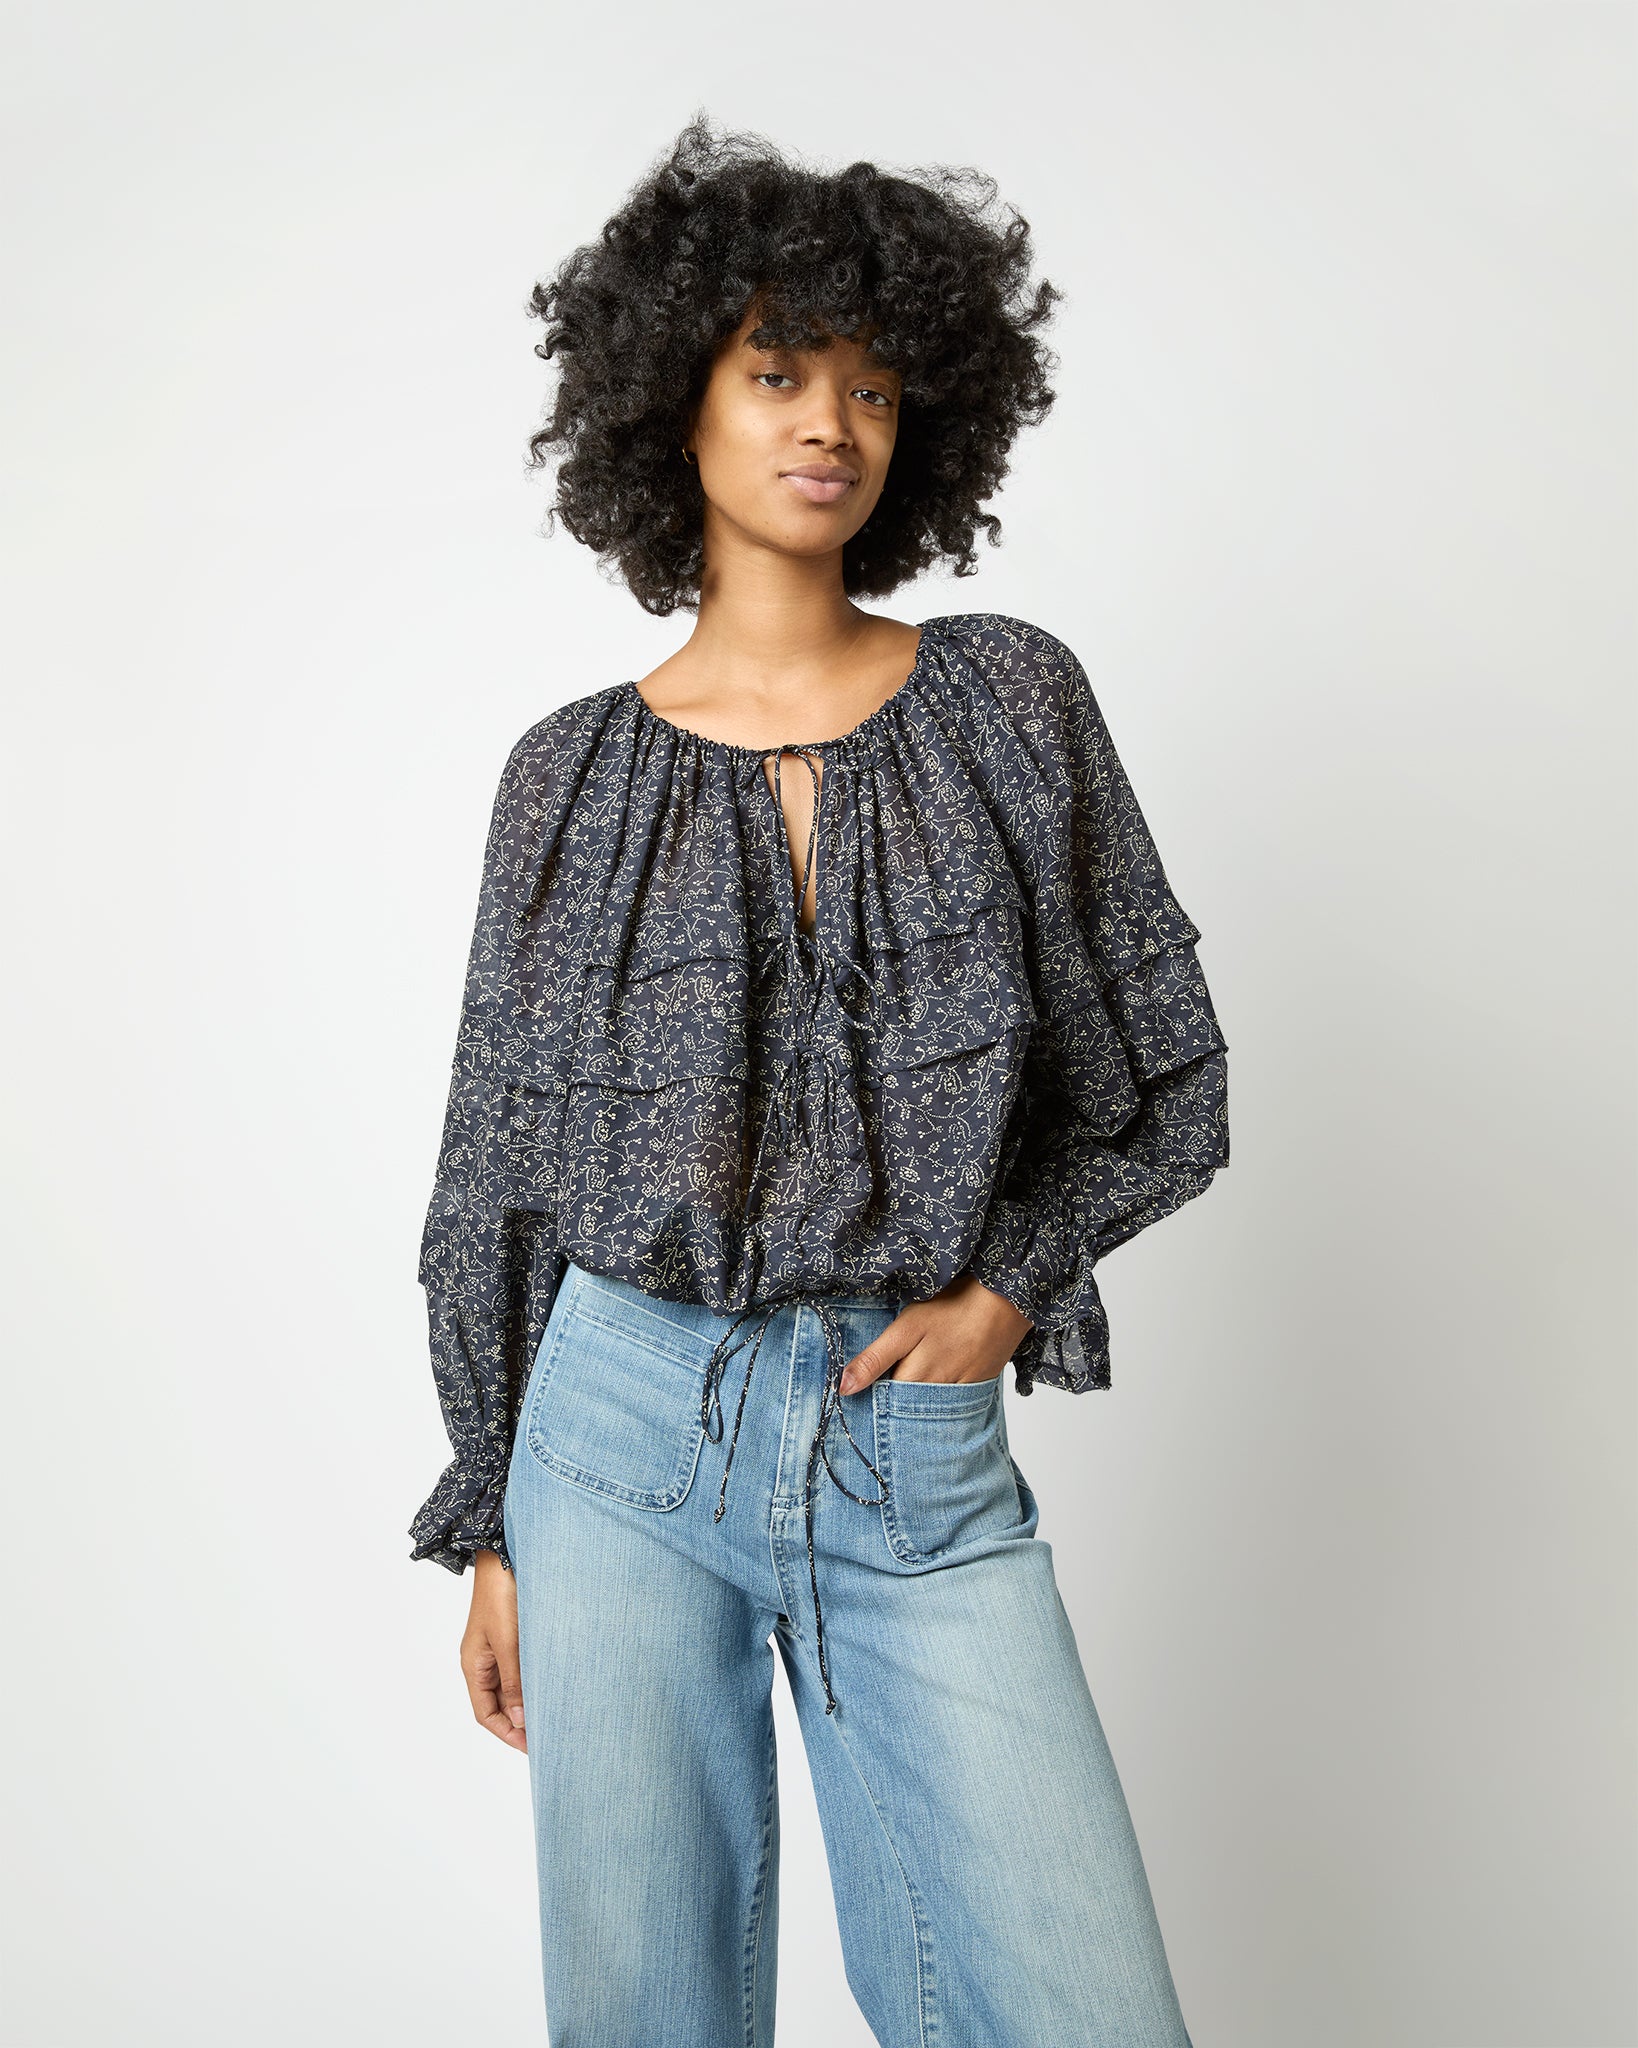 Cora Blouse in Orion